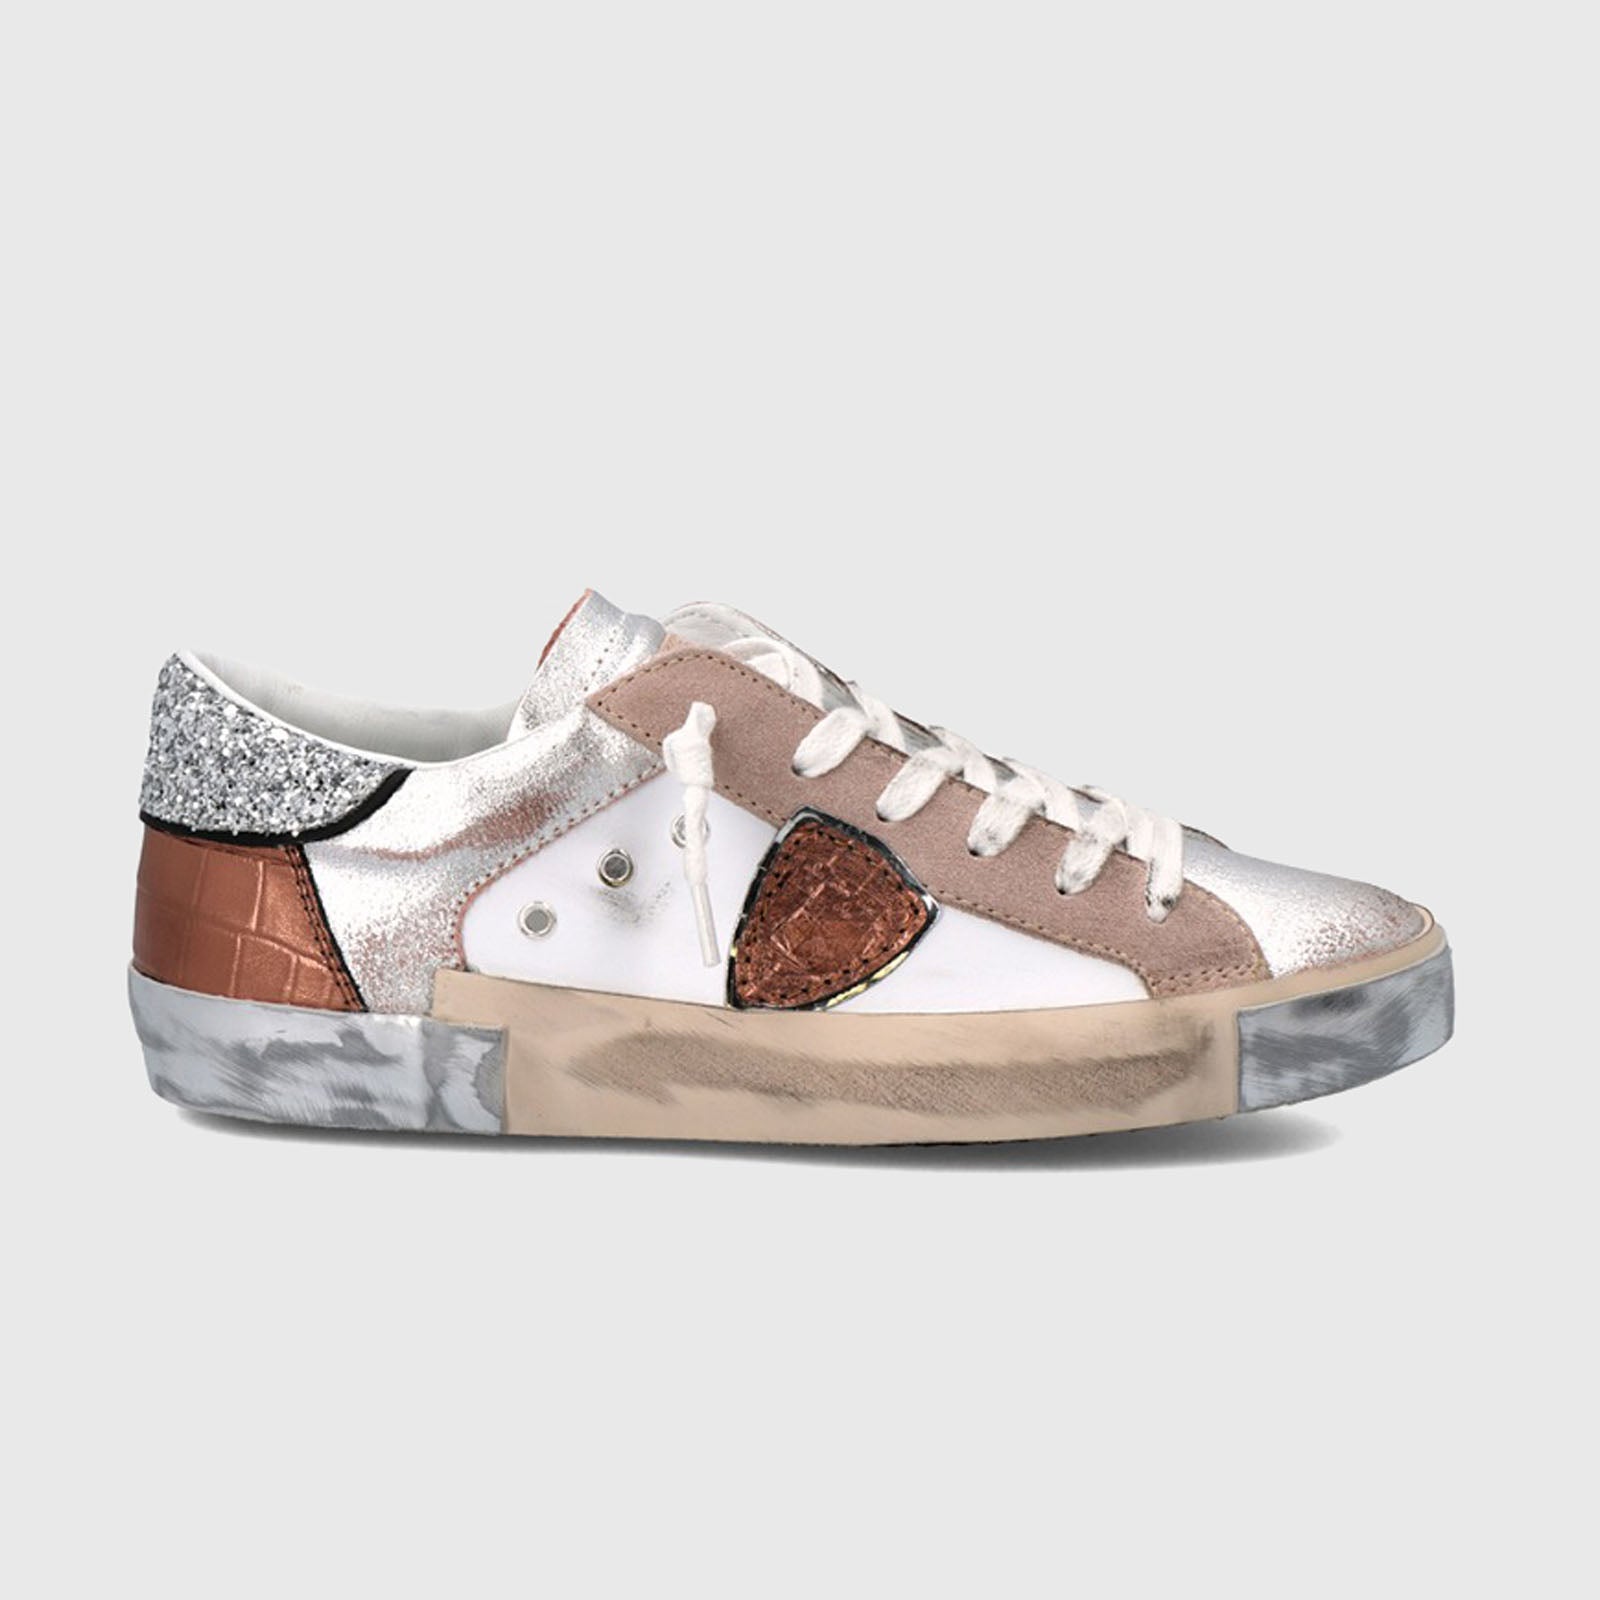 Philippe Model Sneakers PRSX Veau Croco Glitter, Leather White/Pink - 7